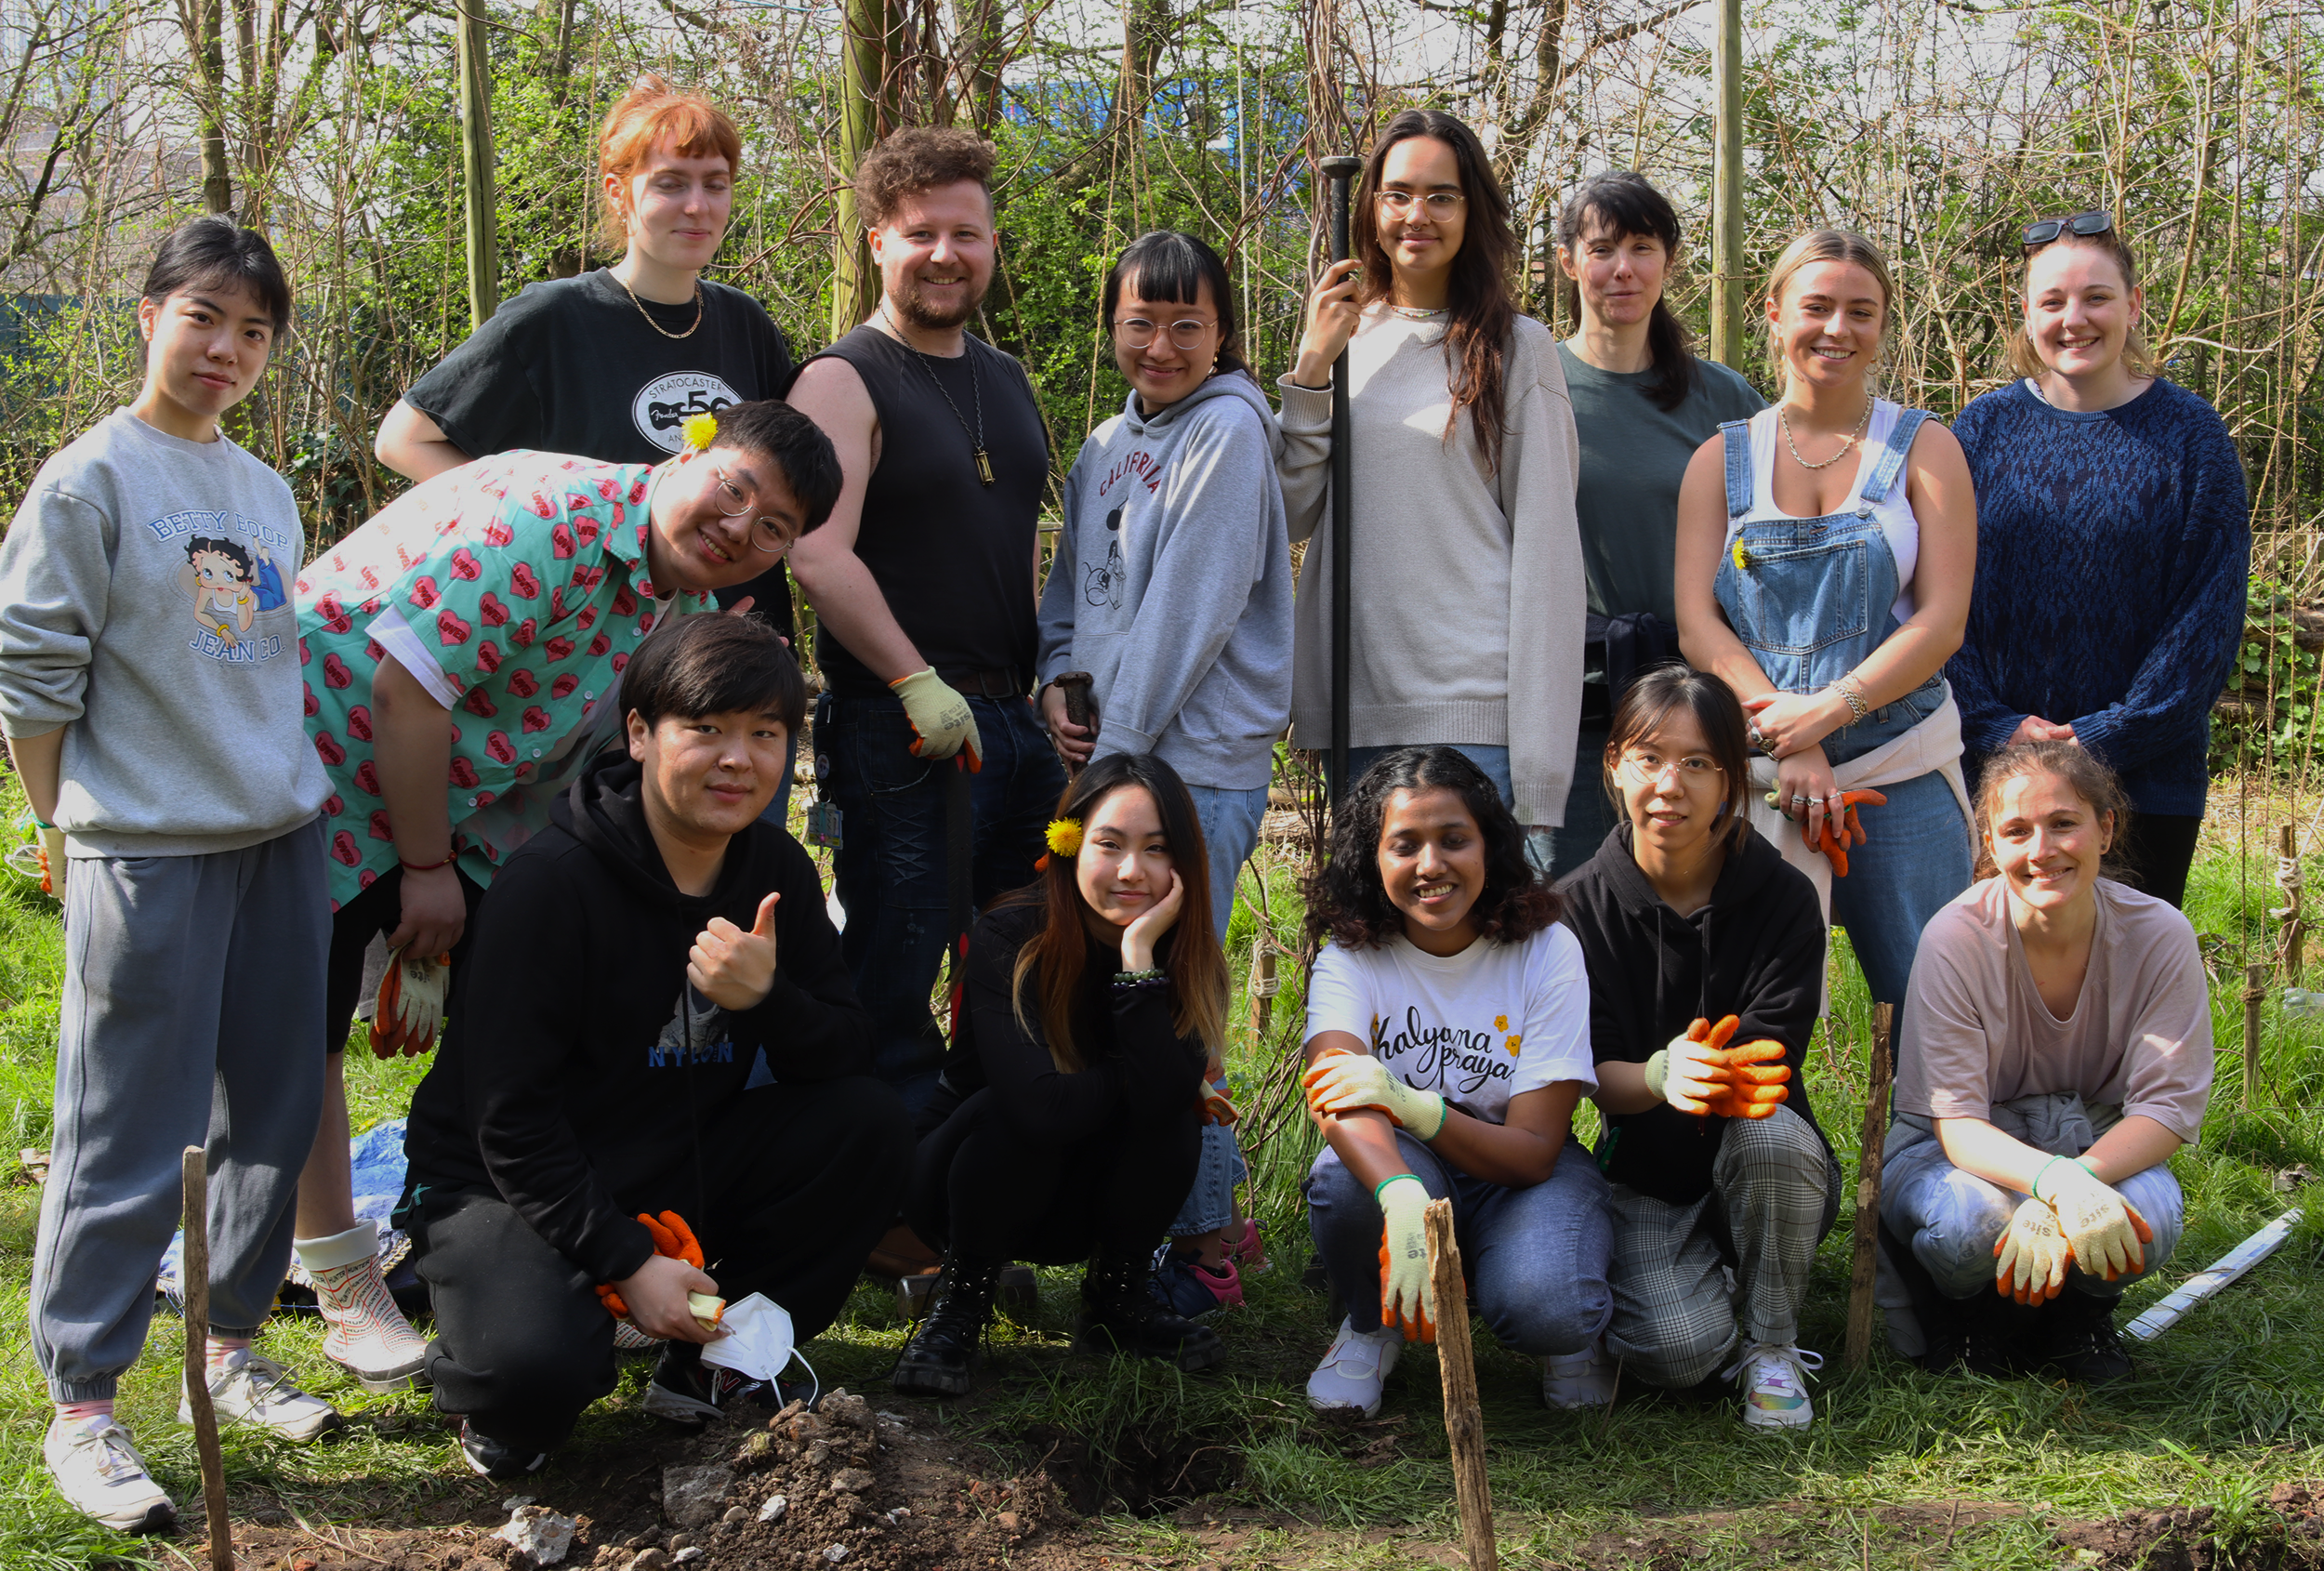 A group of UAL staff and students pose at Stave Hill Ecological Park in London